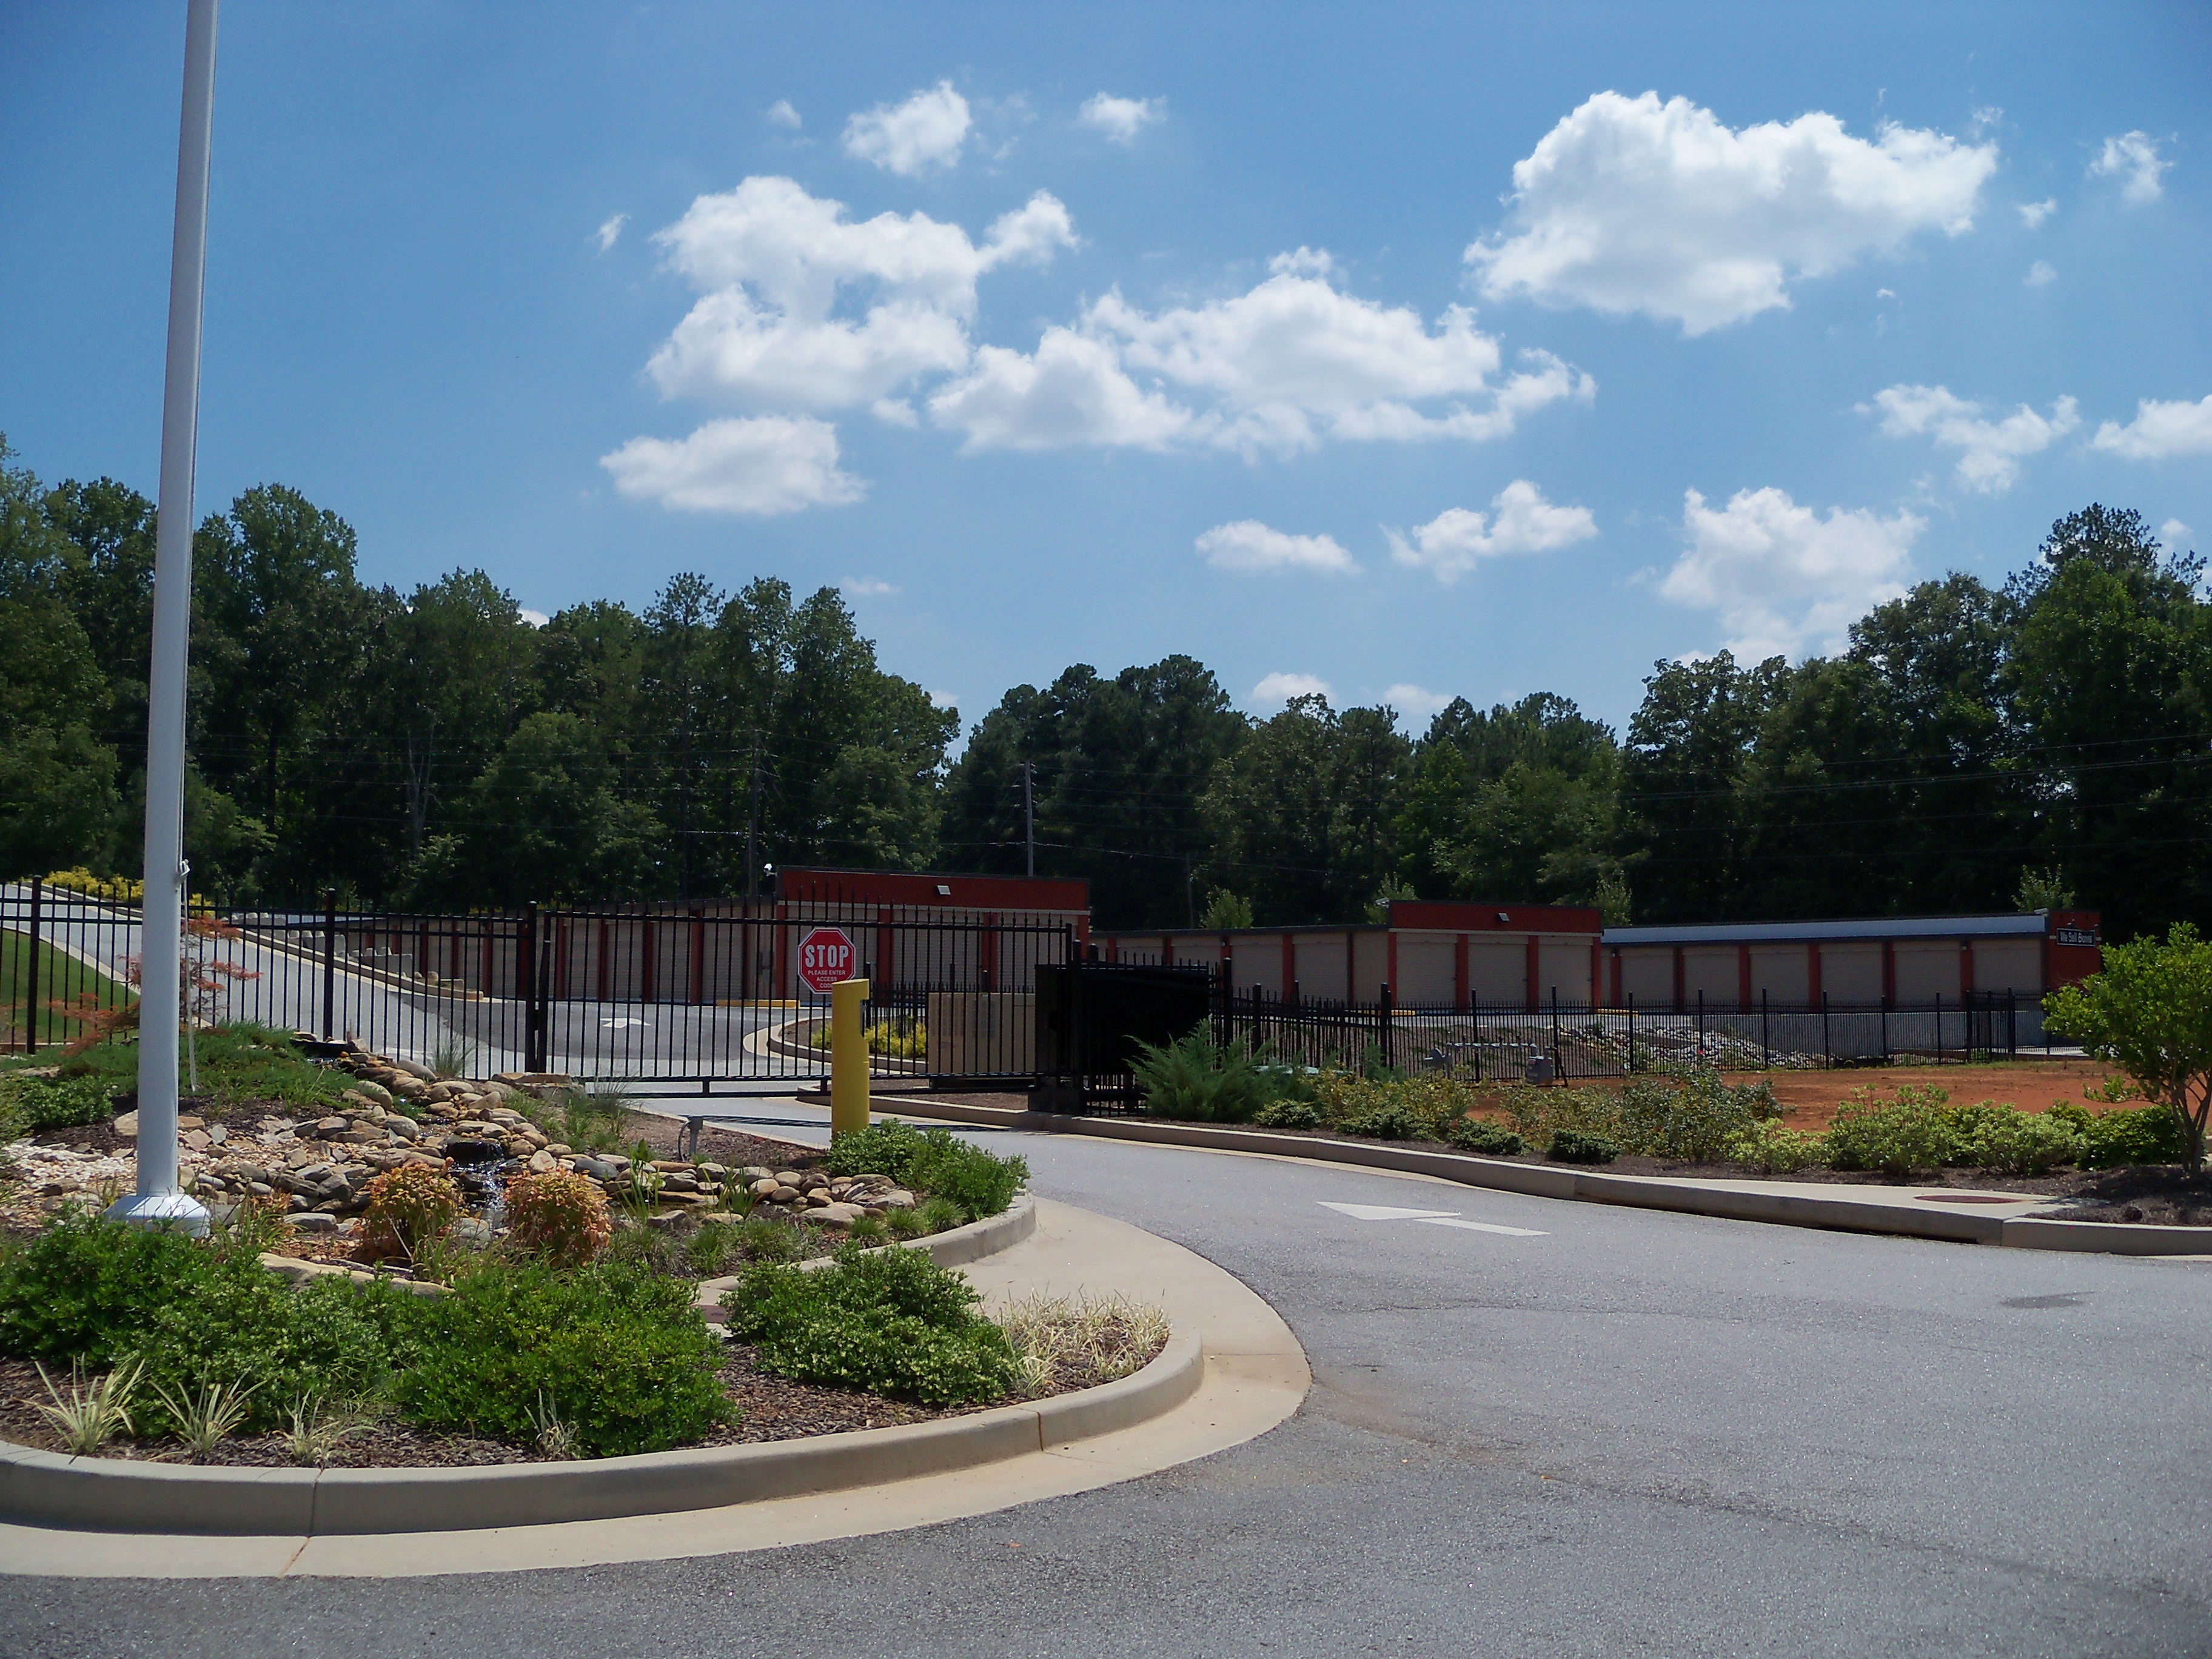 AAA Private Self Storage, LLC - Secure, Climate-Controlled Storage Units in Carrollton, GA